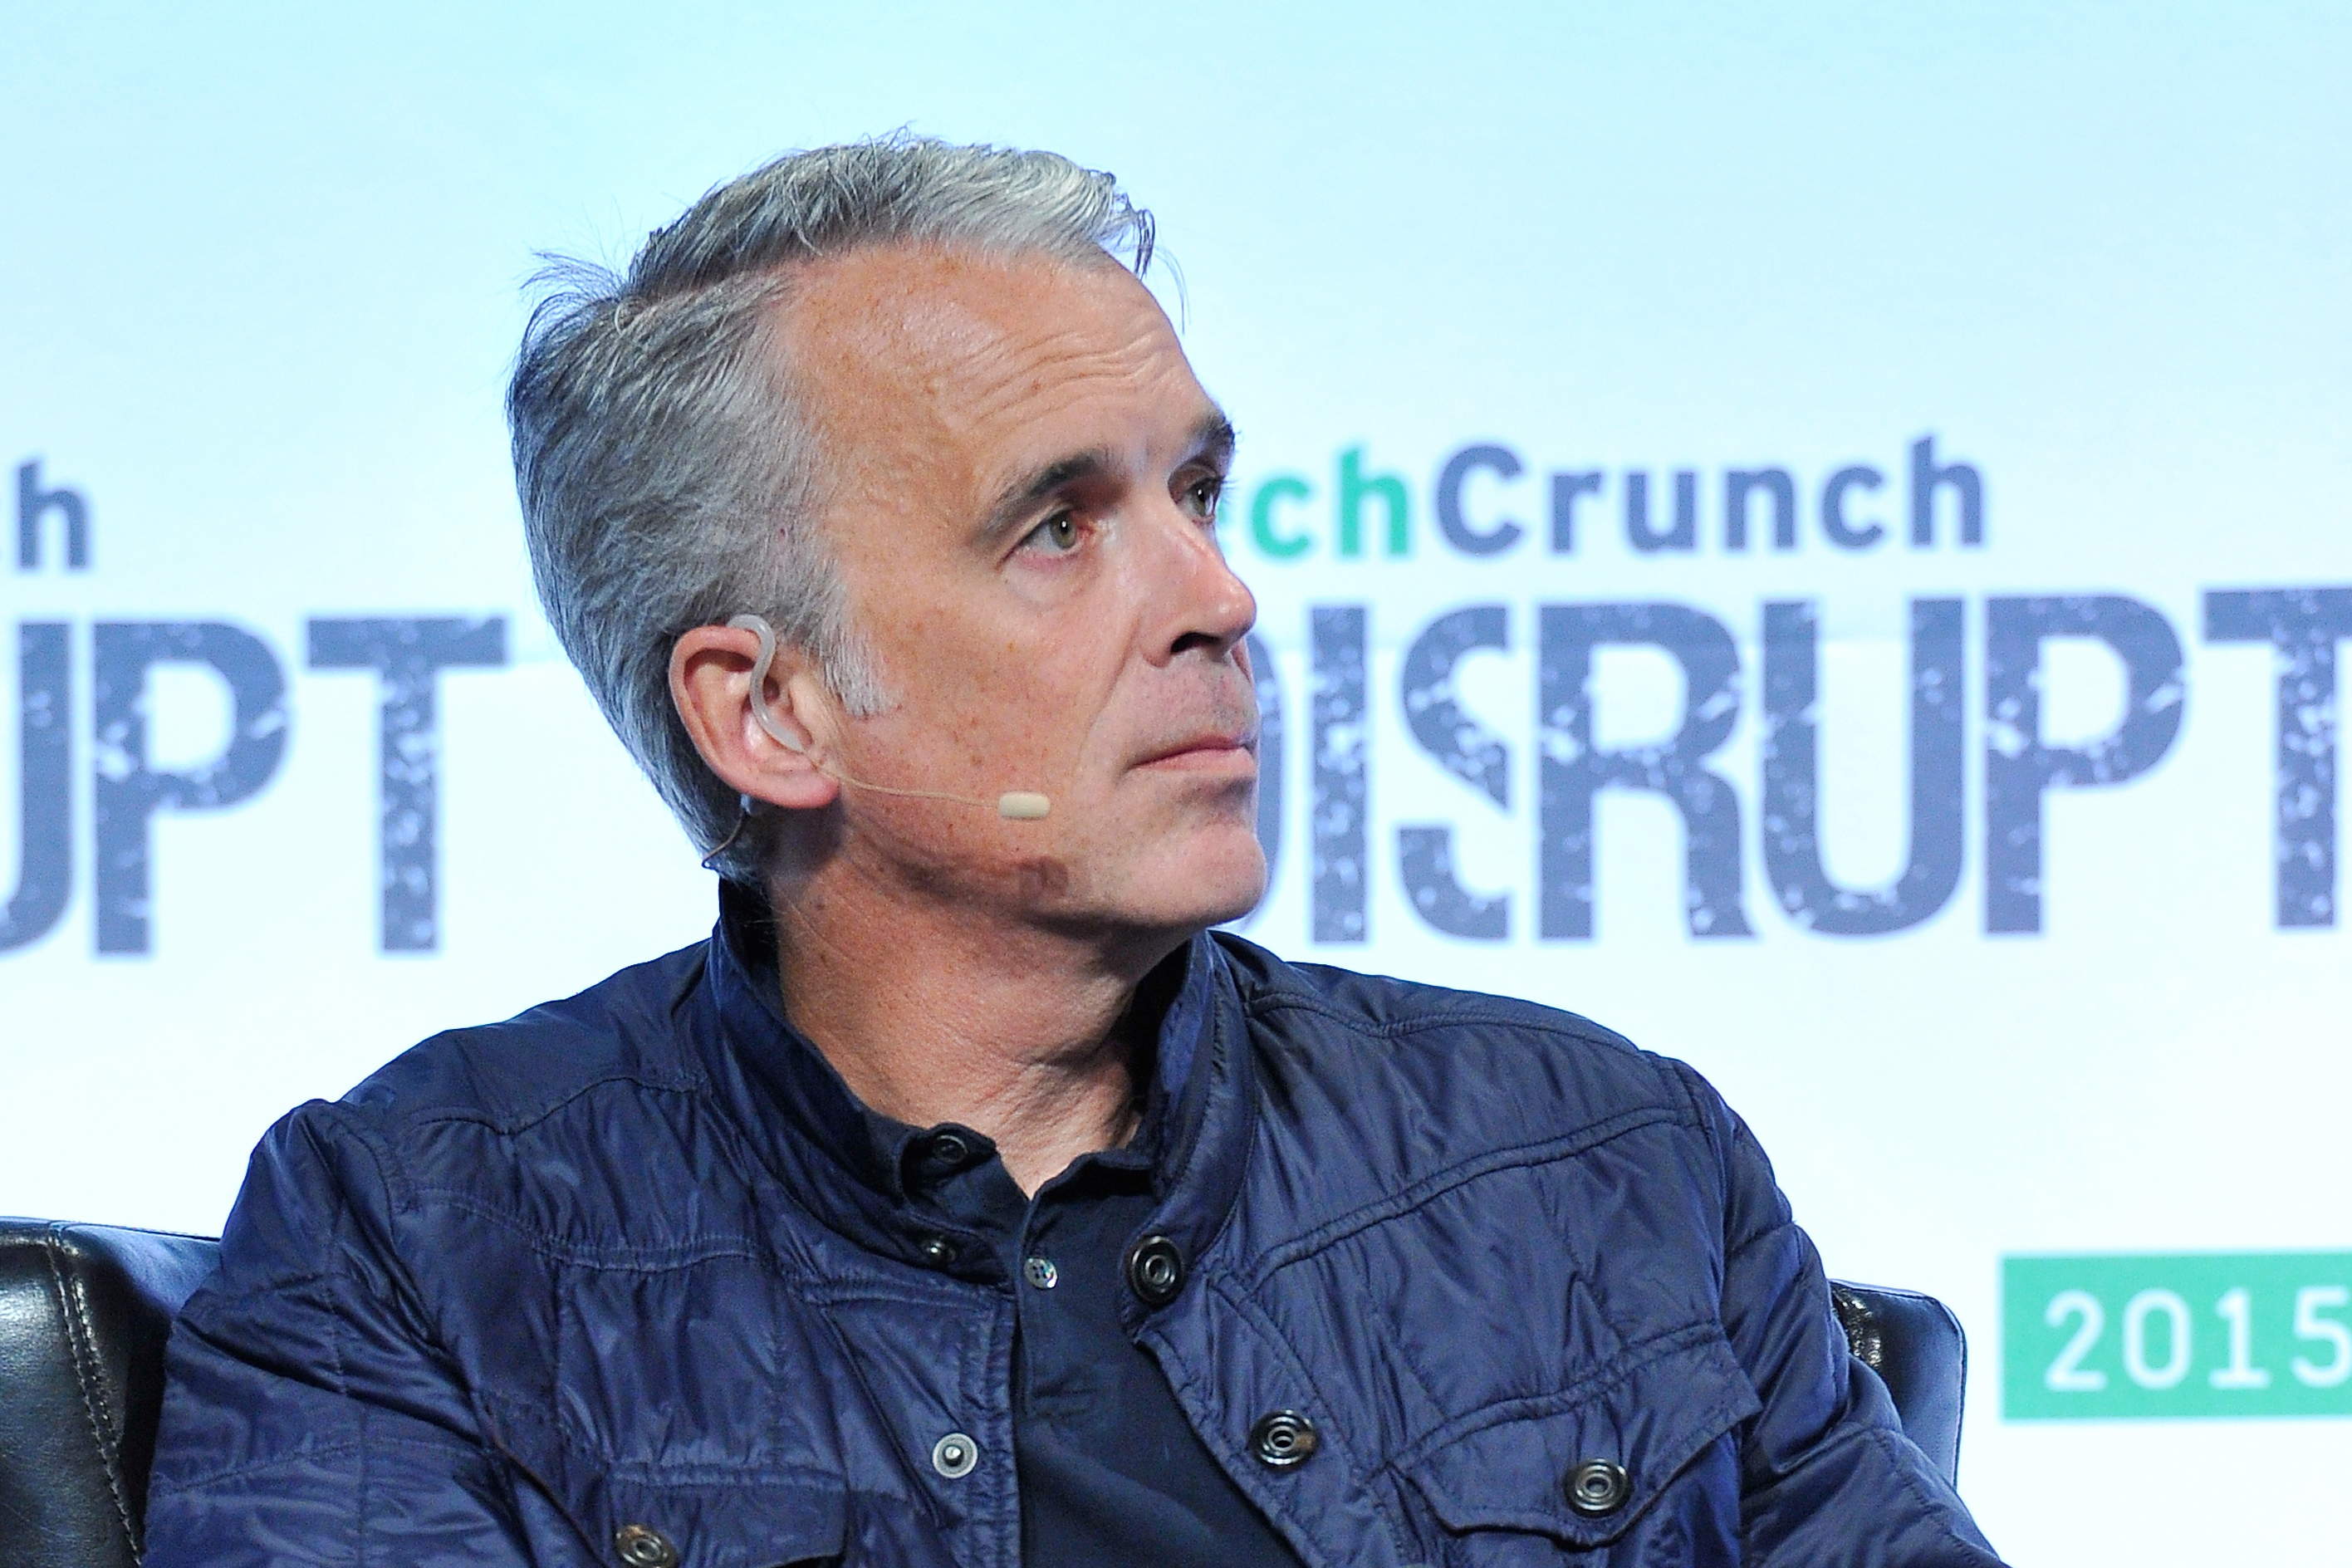 A man with short gray hair sits on a black chair, holding a tablet. He wears a dark blue jacket, jeans, and brown loafers. The background reads "TechCrunch Disrupt 2015."